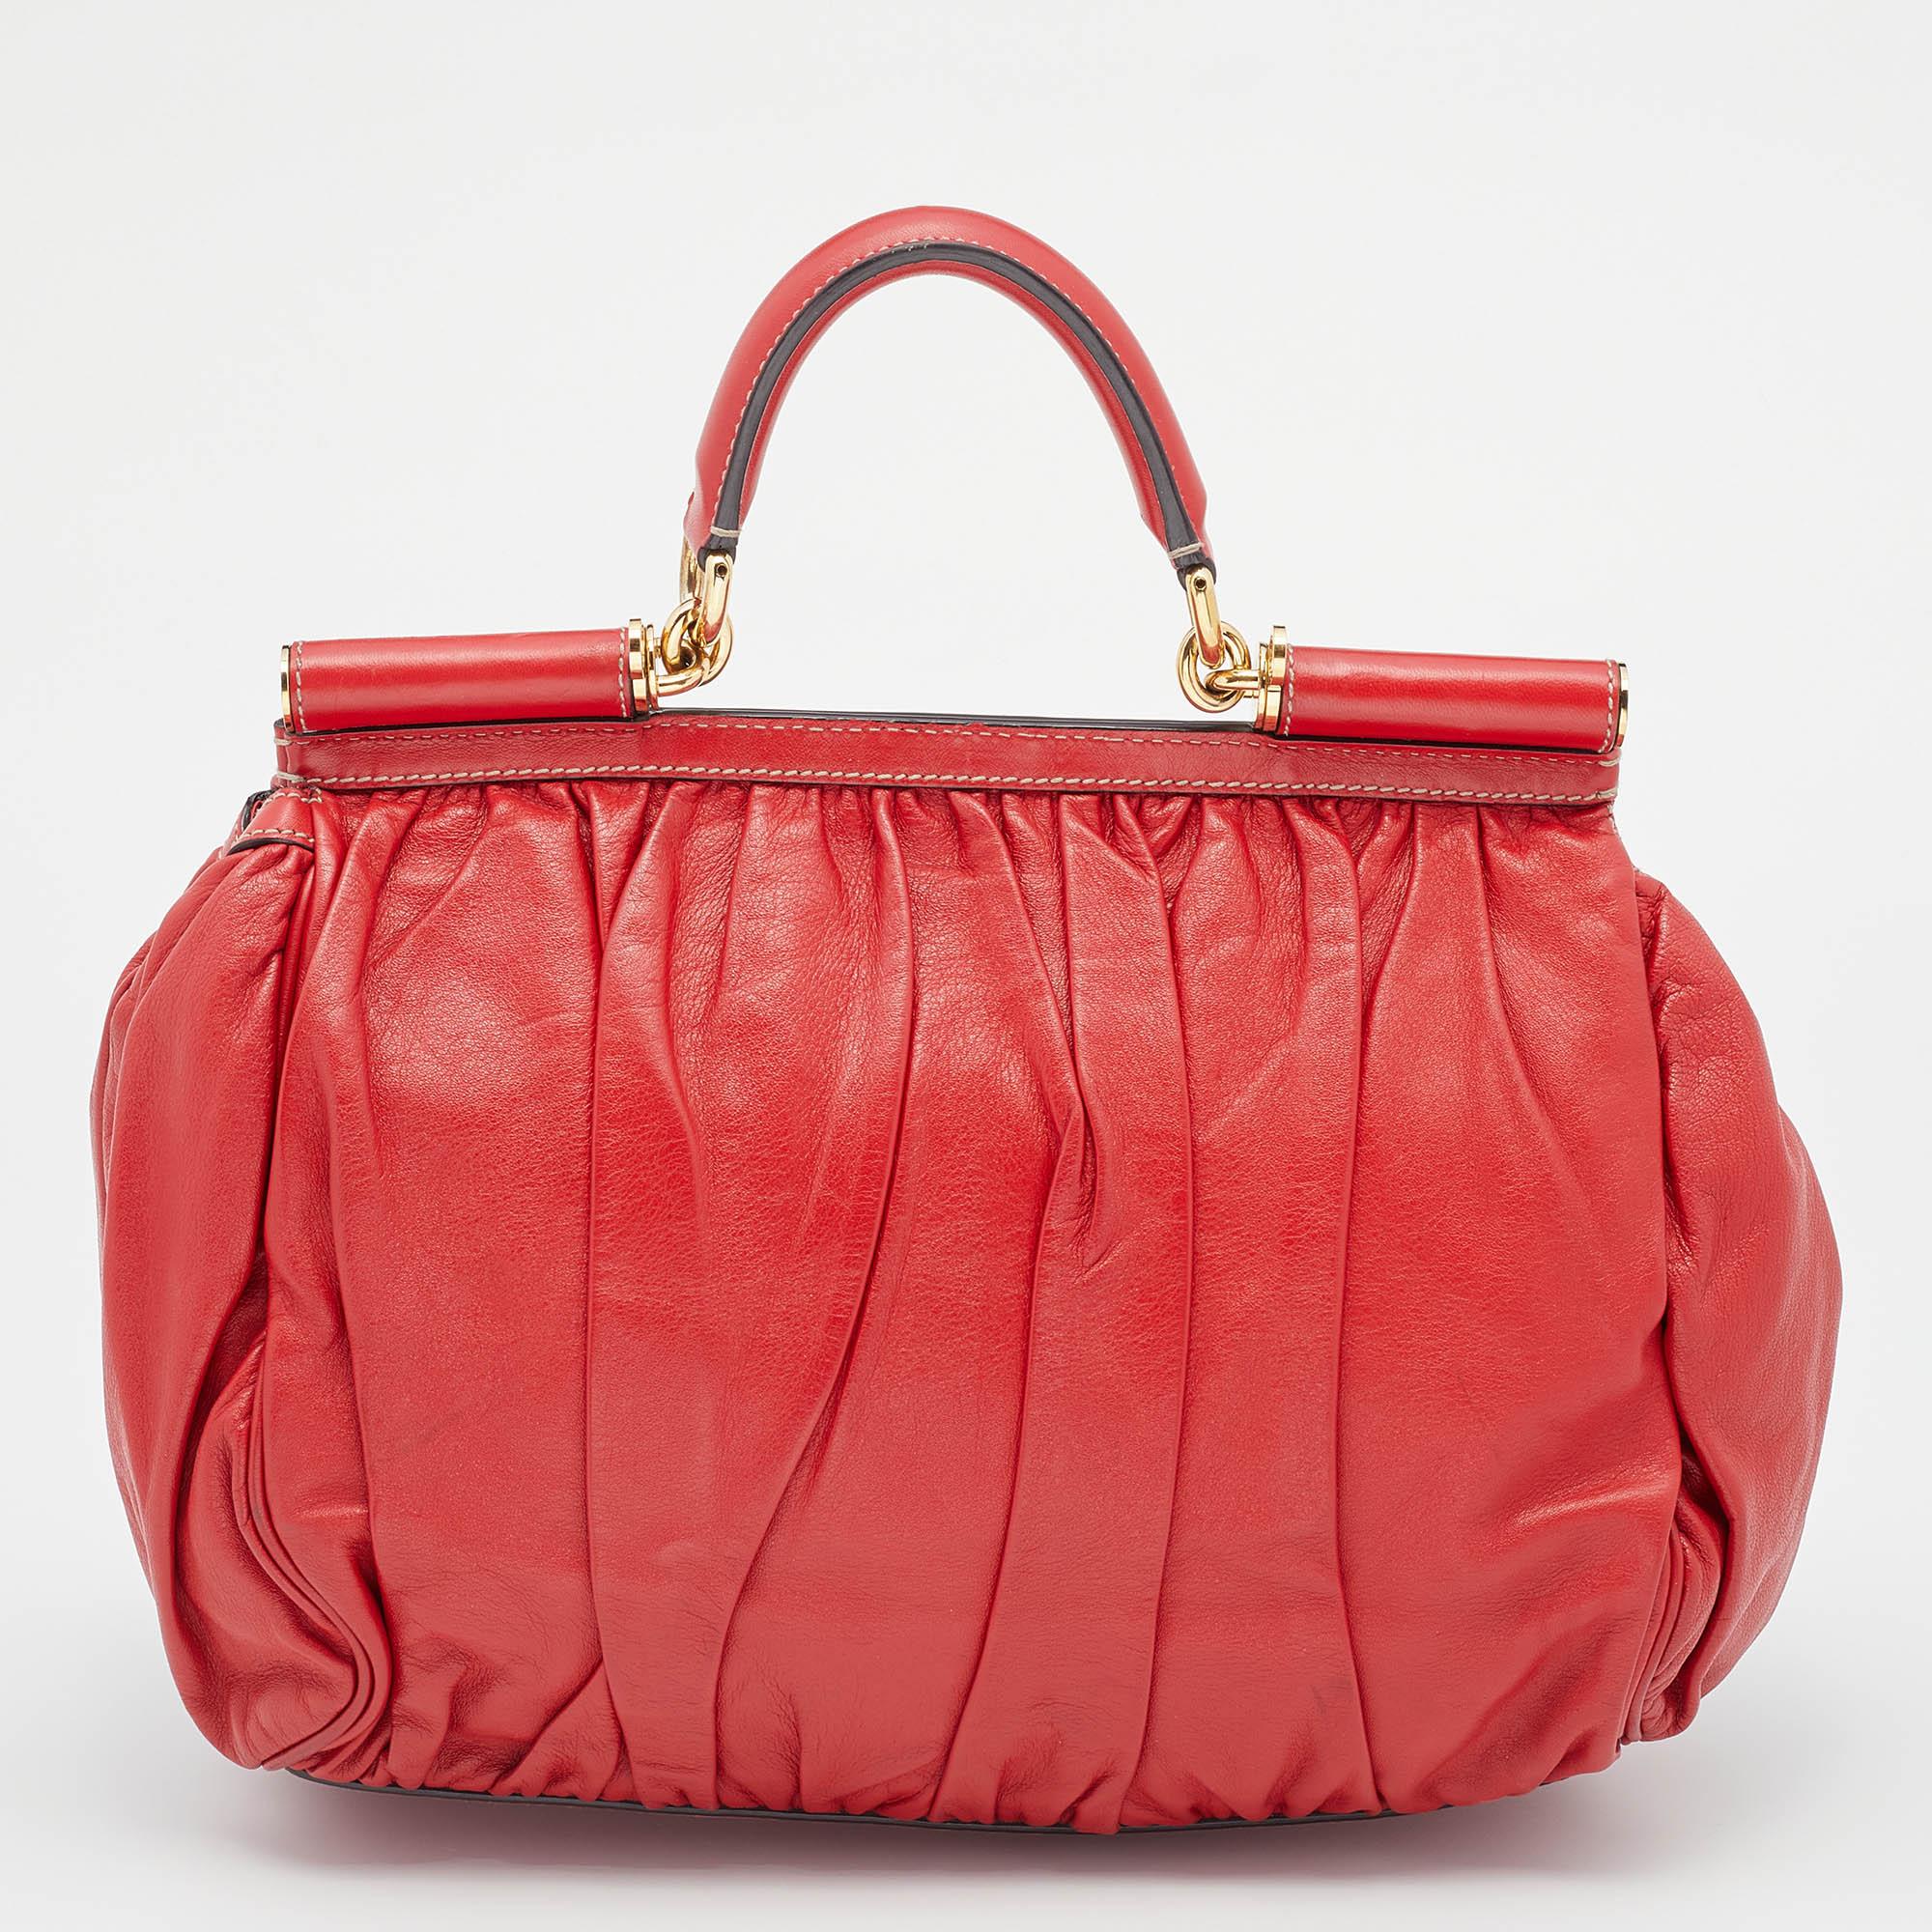 The Miss Sicily bag is one of the most celebrated creations from Dolce & Gabbana. This bag beautifully embodies the spirit of feminity that the Italian luxury brand carries. Crafted from pleated leather, this red top handle bag has a rounded shape